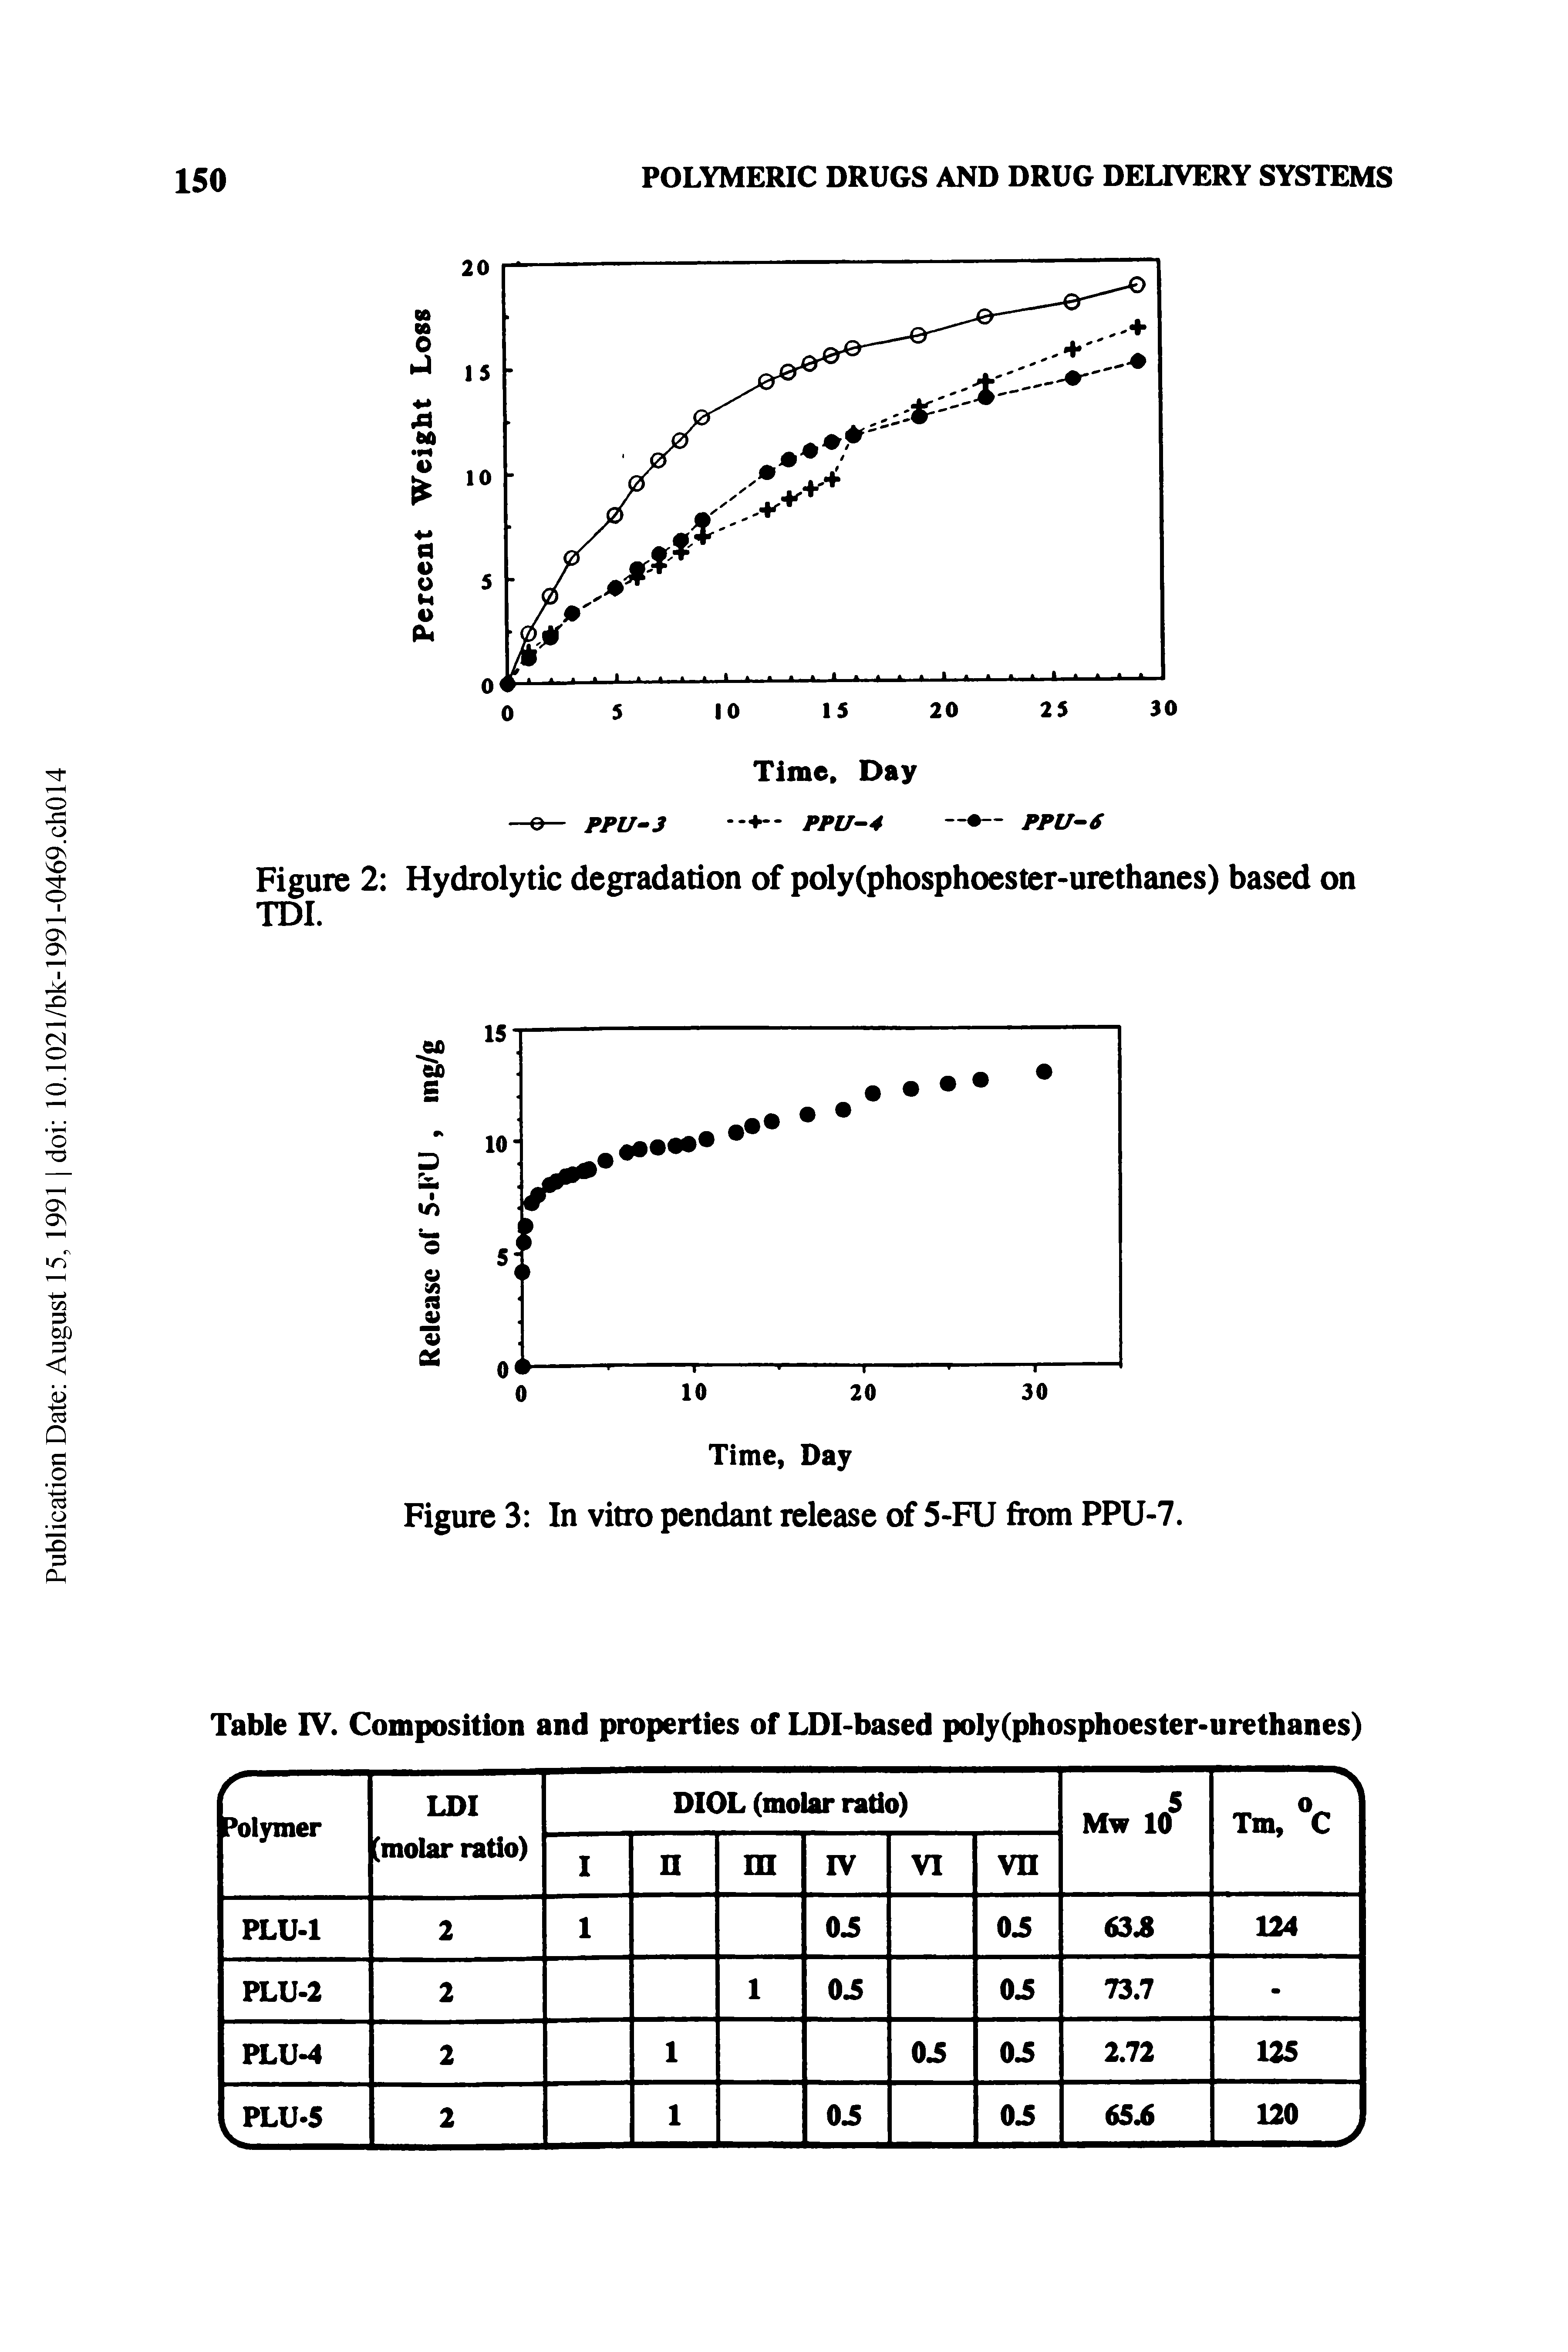 Figure 2 Hydrolytic degradation of poly(phosphoester-urethanes) based on TDI.